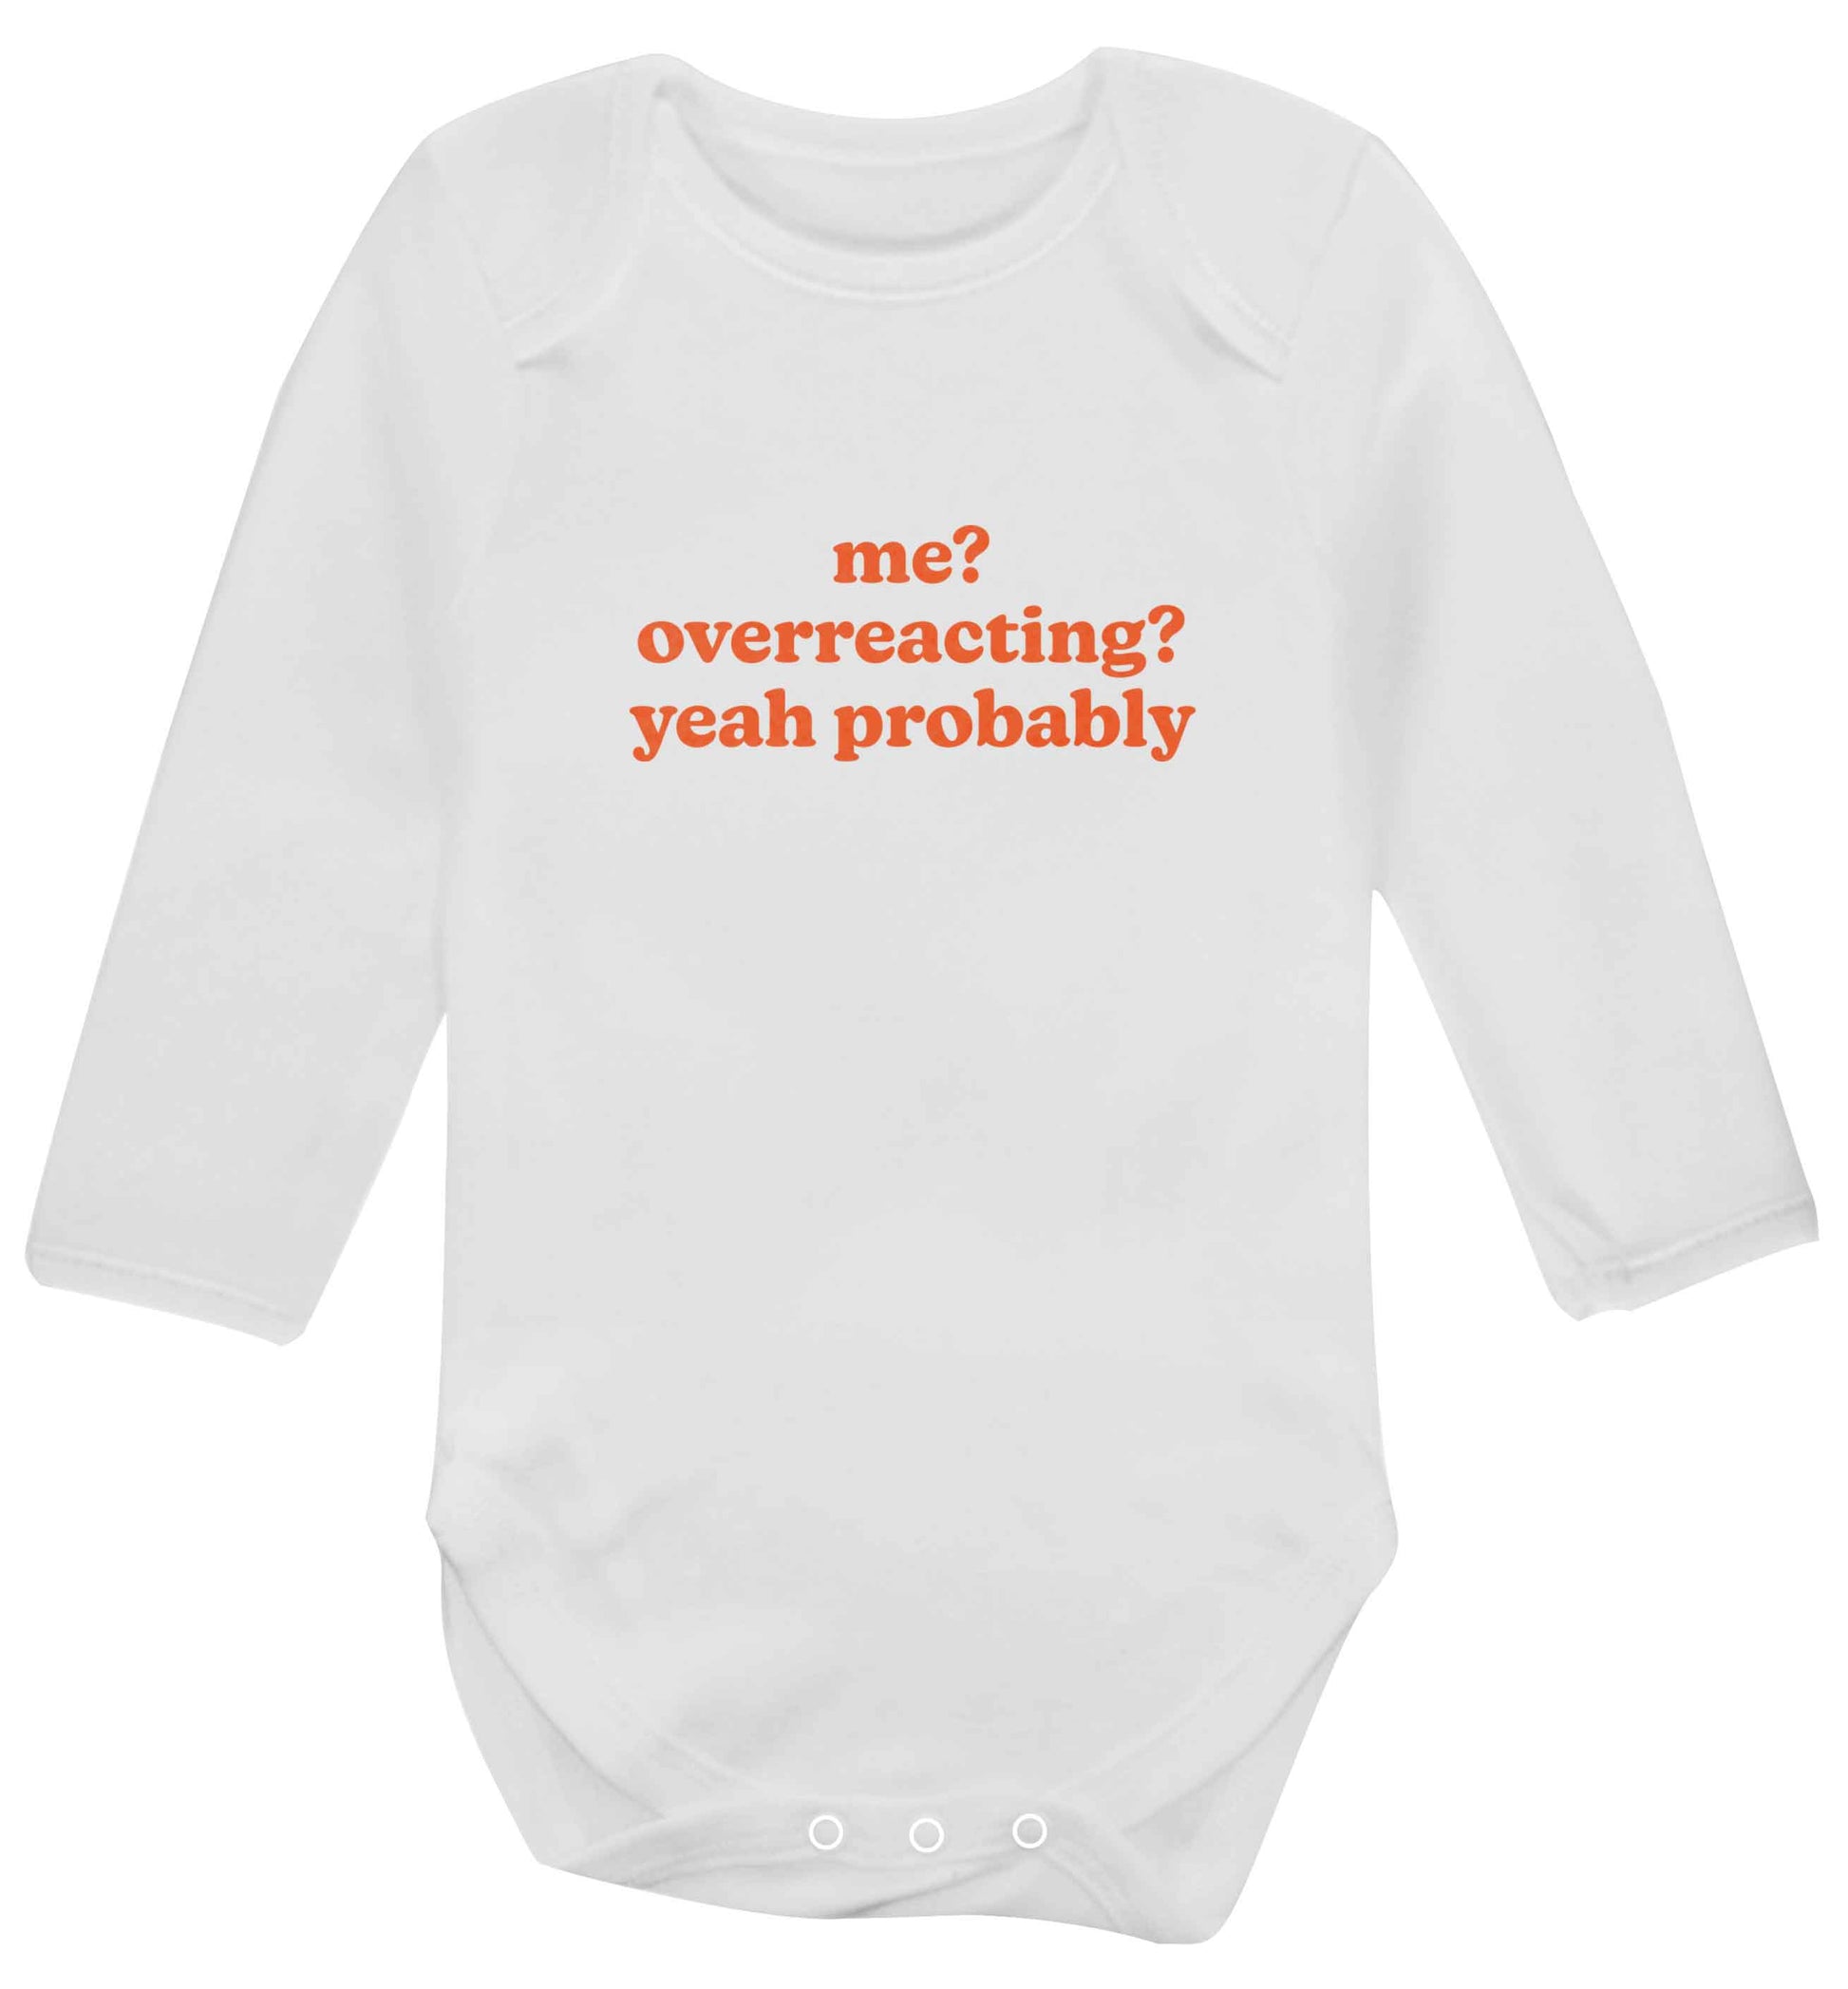 Me? Overreacting? Yeah probably baby vest long sleeved white 6-12 months